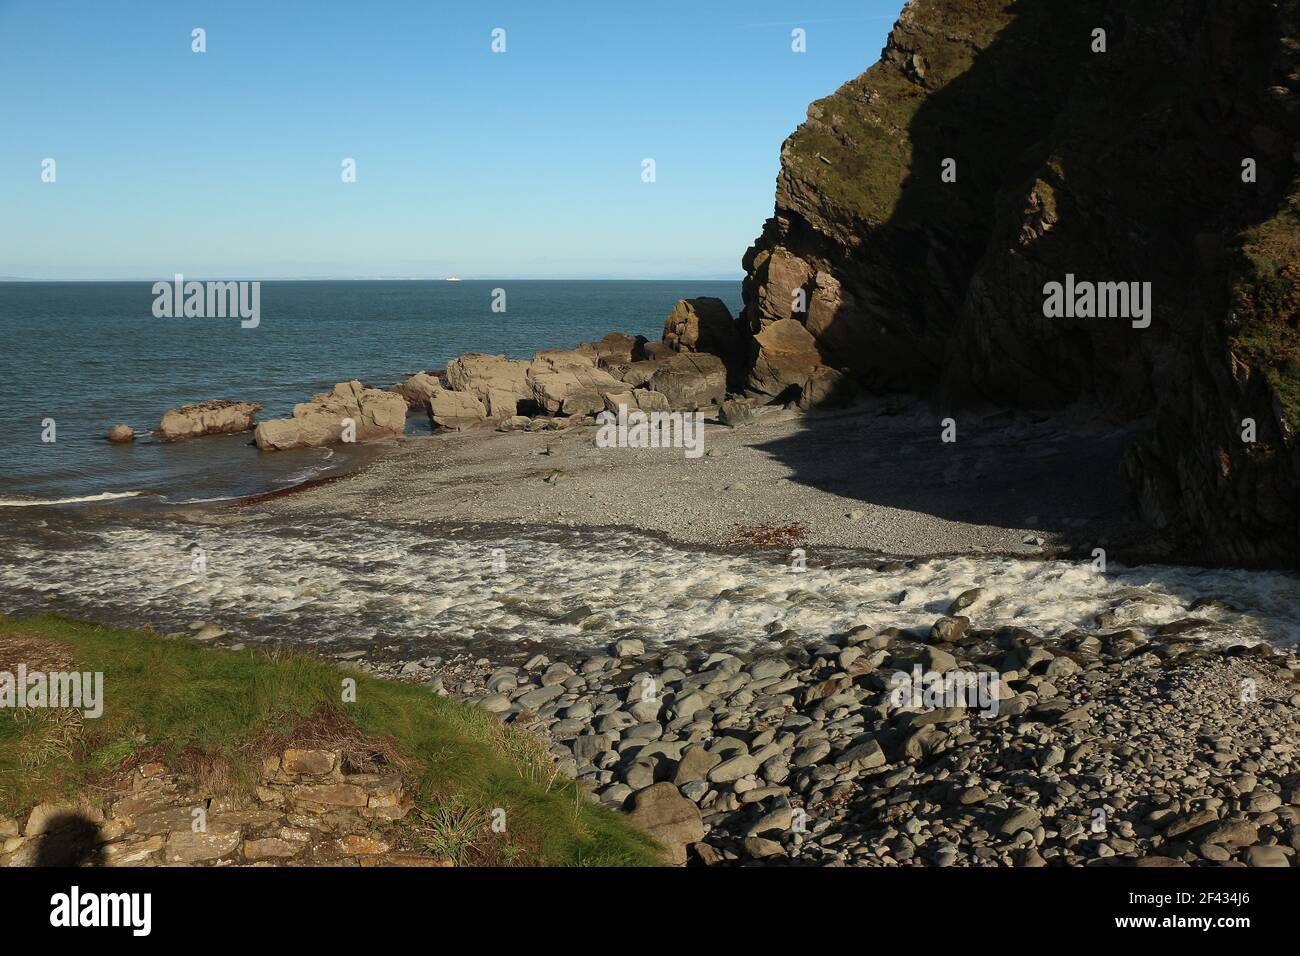 The national trust site of Heddon valley in it's full glory with the river gushing out to sea at Heddons mouth in North Devon, south west England foll Stock Photo